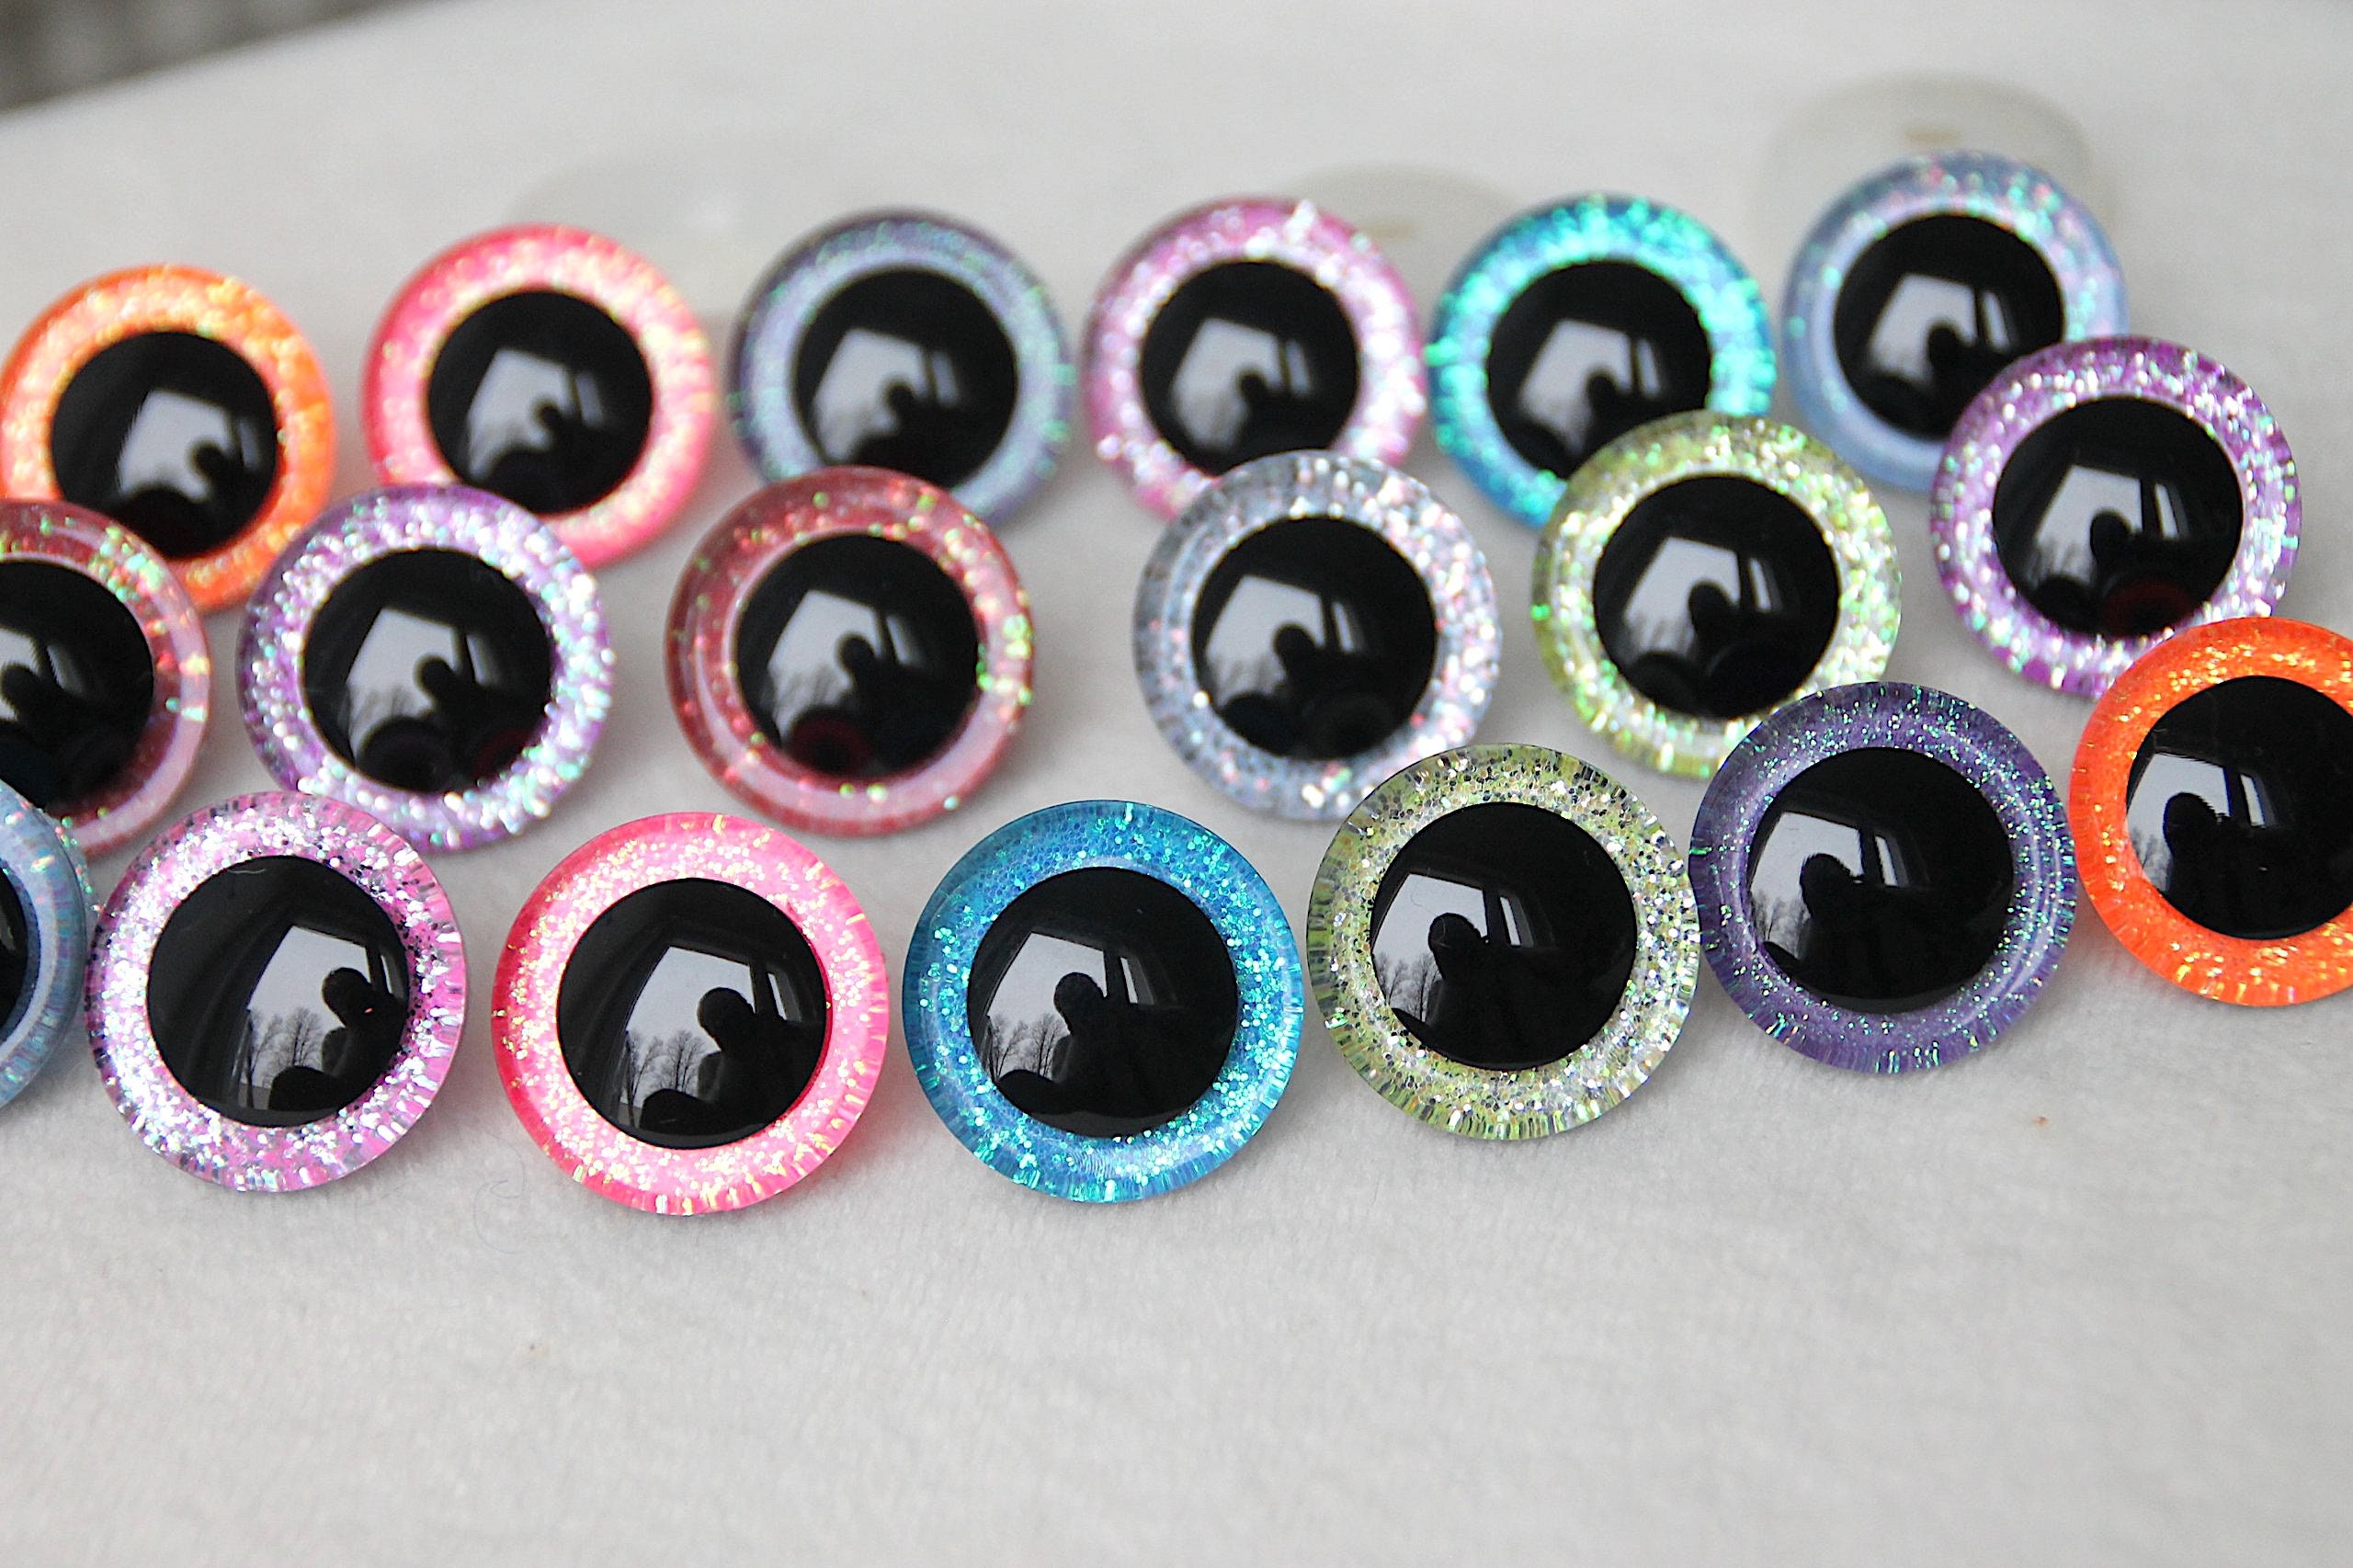 56 Pieces 16-30 mm Large Safety Eyes for Amigurumi Big Stuffed